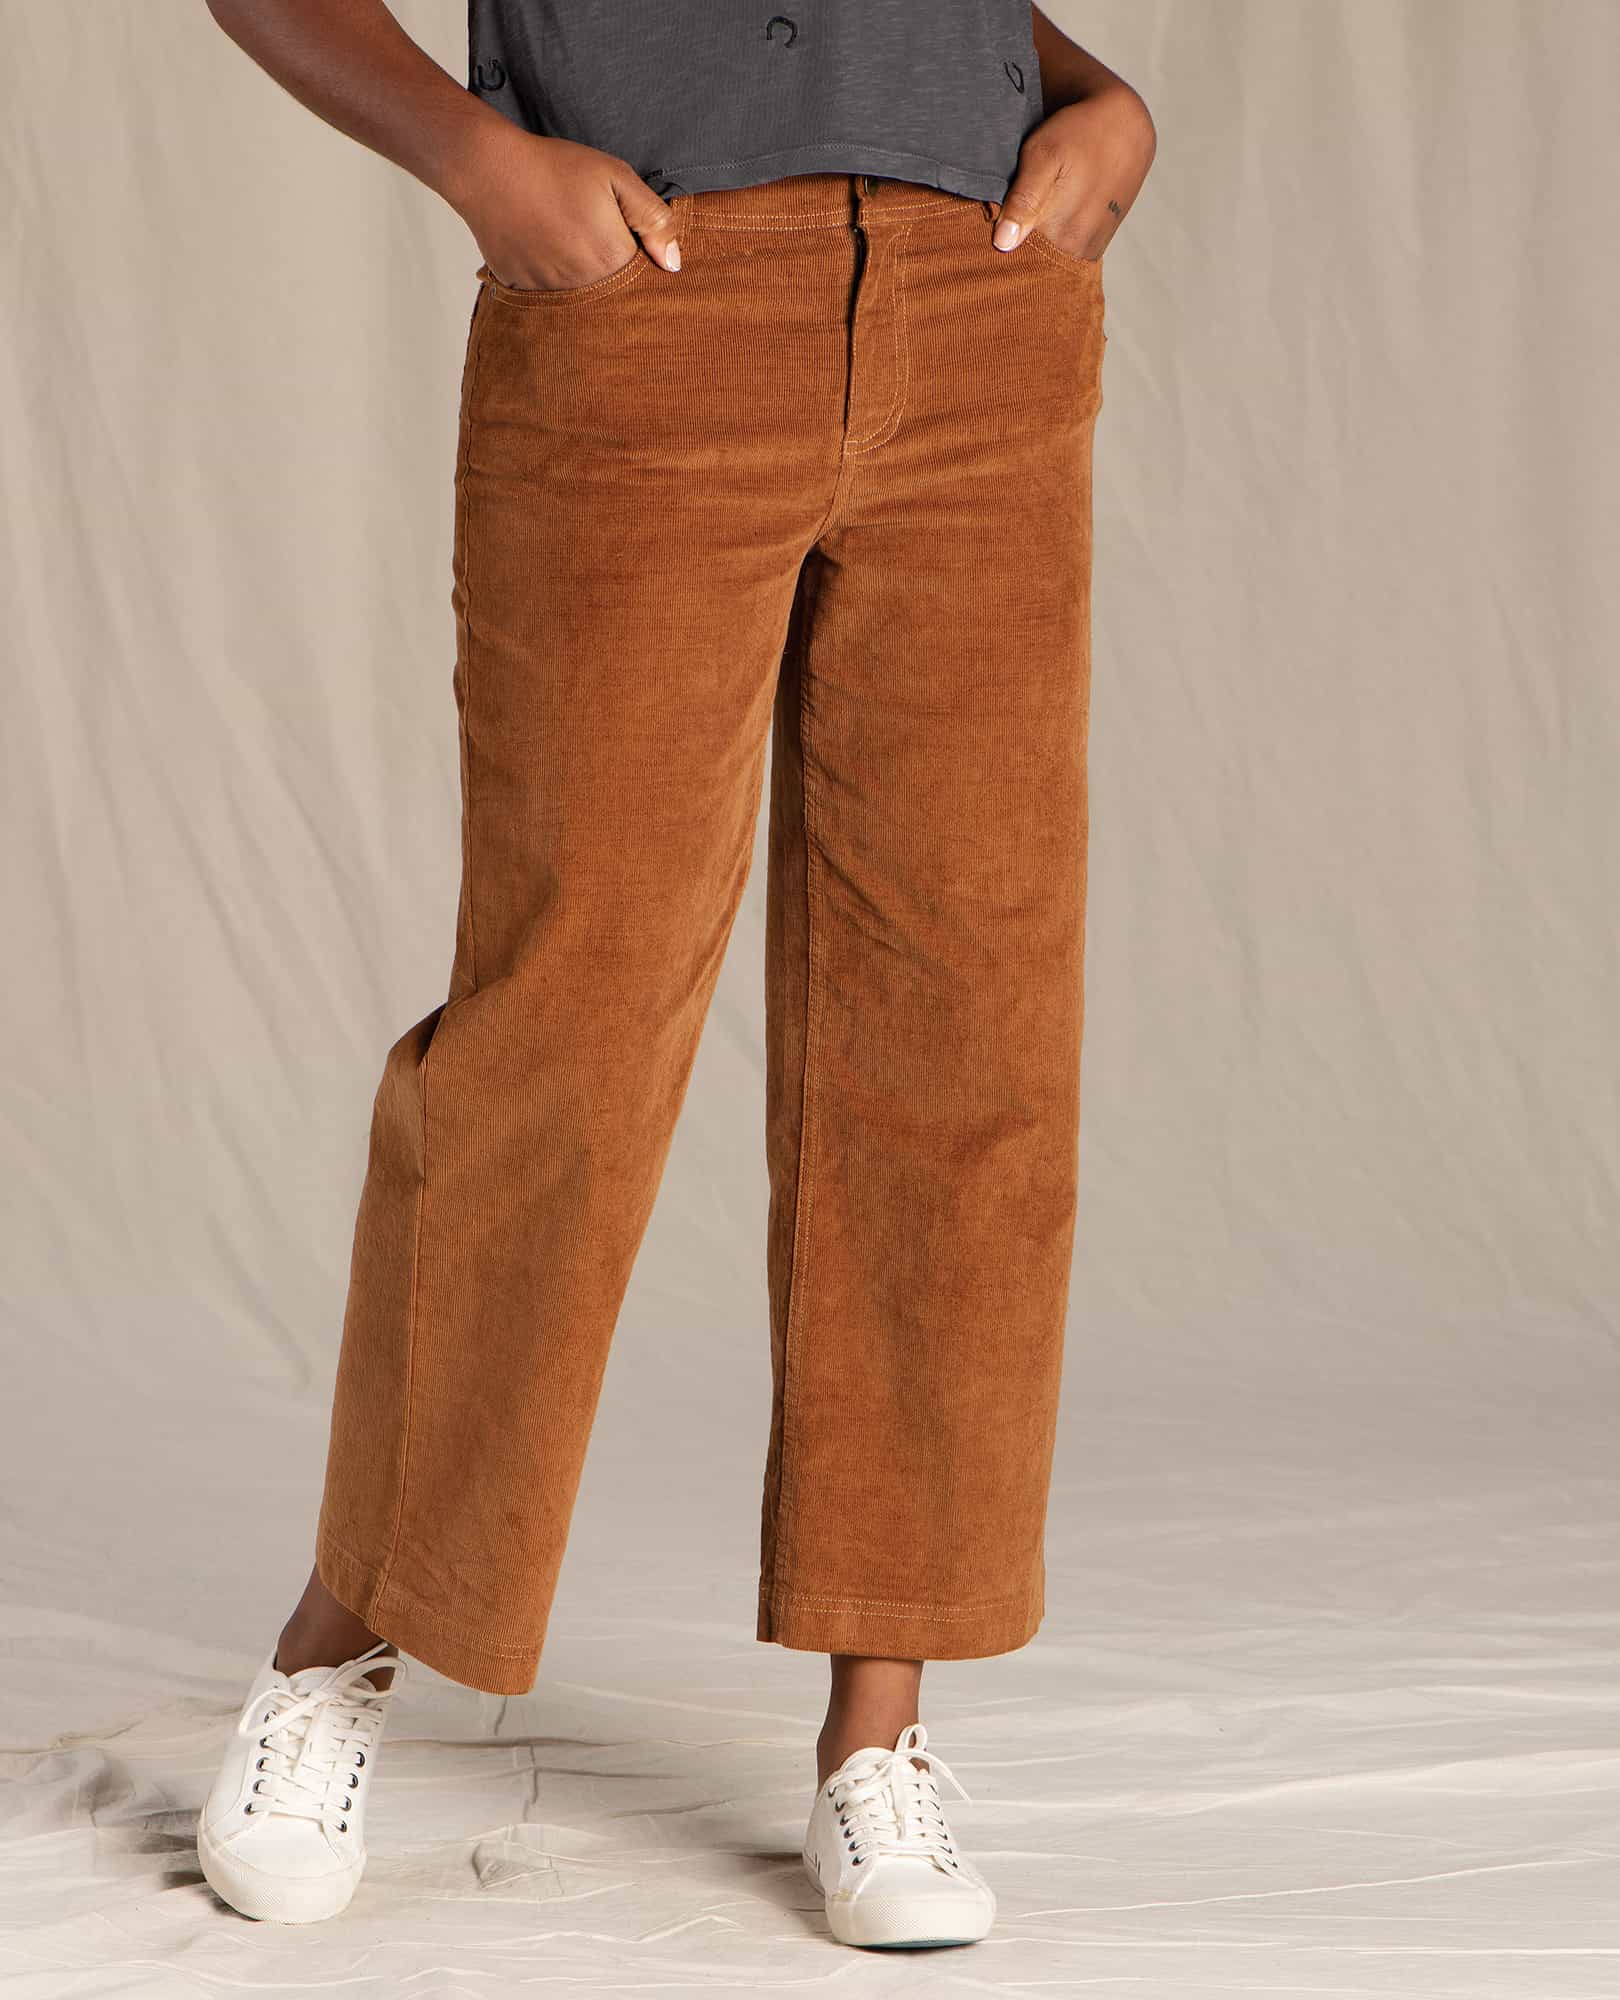 1/2: Brown corduroy pants could be the new jeans